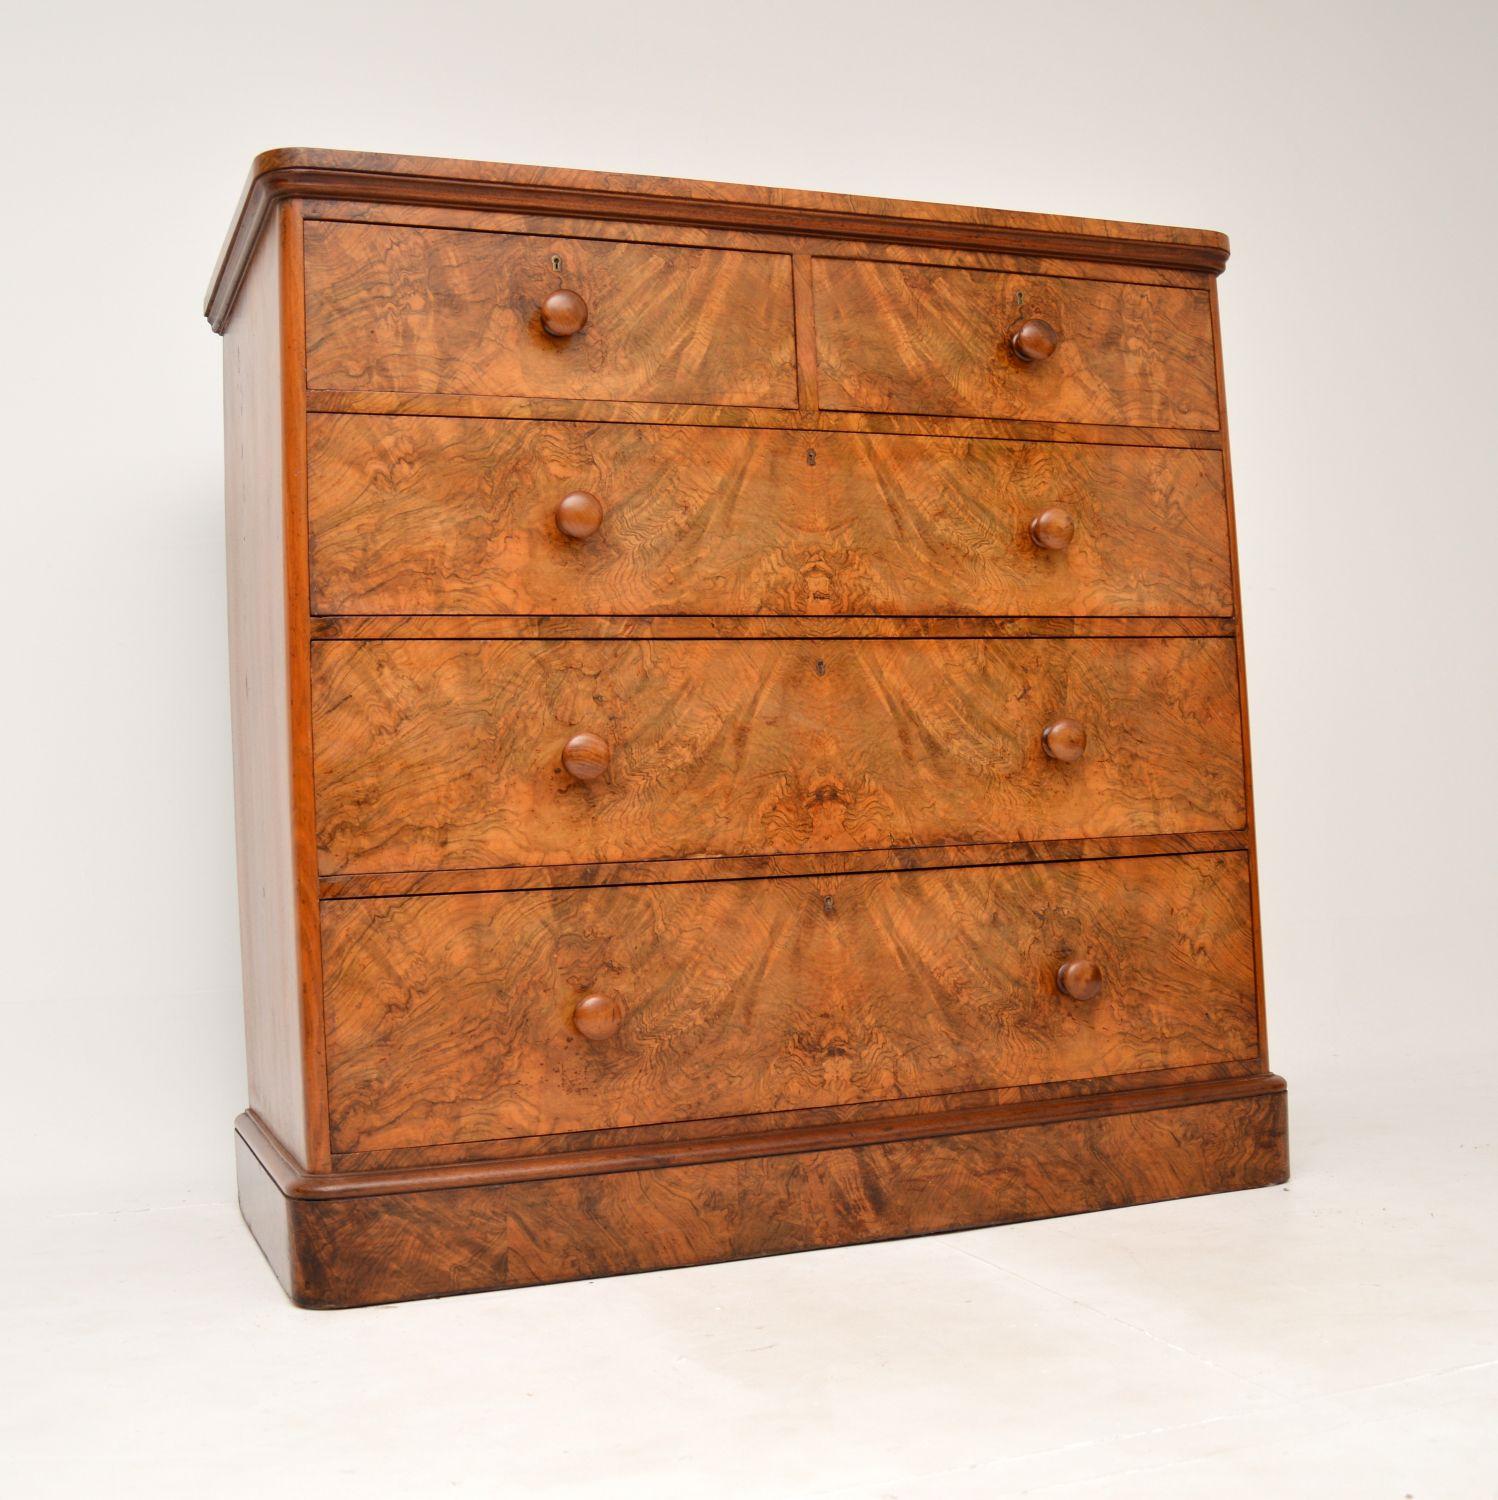 A superb antique Victorian chest of drawers in walnut. This was made in England, it dates from the 1860-1880’s.

It is large and very impressive, the quality is outstanding. There are stunning burr walnut grain patterns throughout, even the plinth